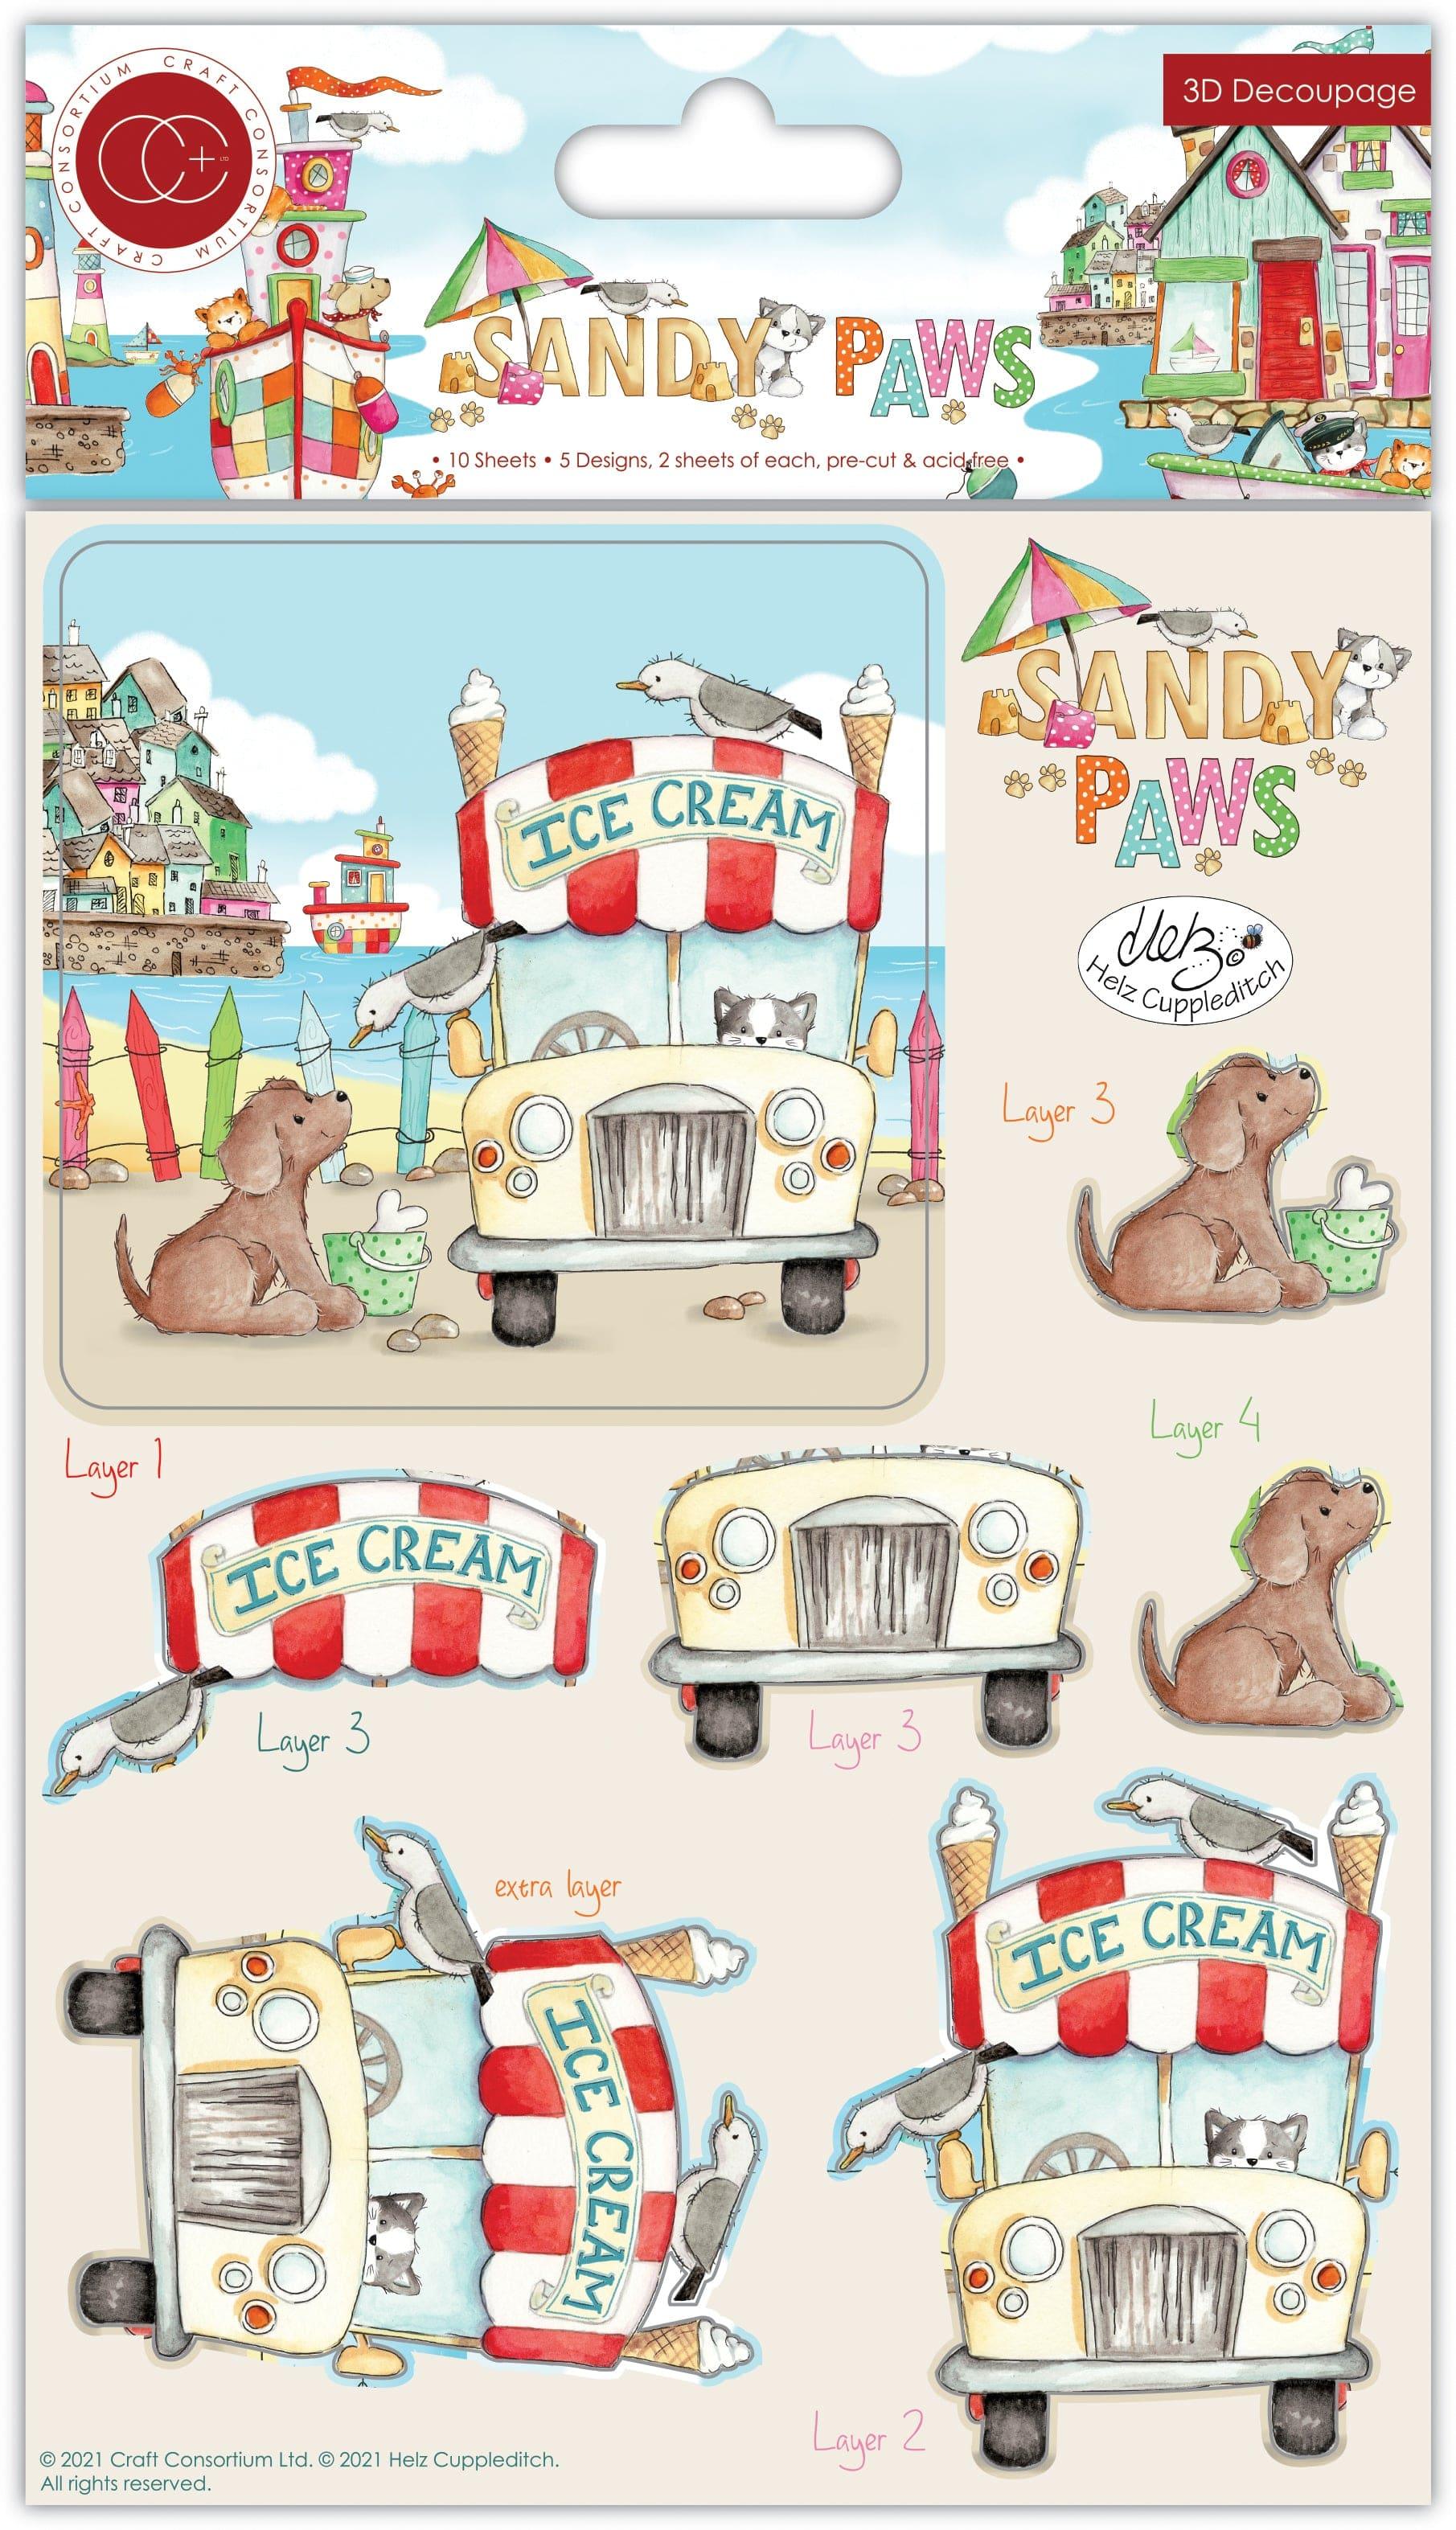 Sandy Paws Collection 3D Decoupage Scrapbook Embellishments by Craft Consortium - Scrapbook Supply Companies